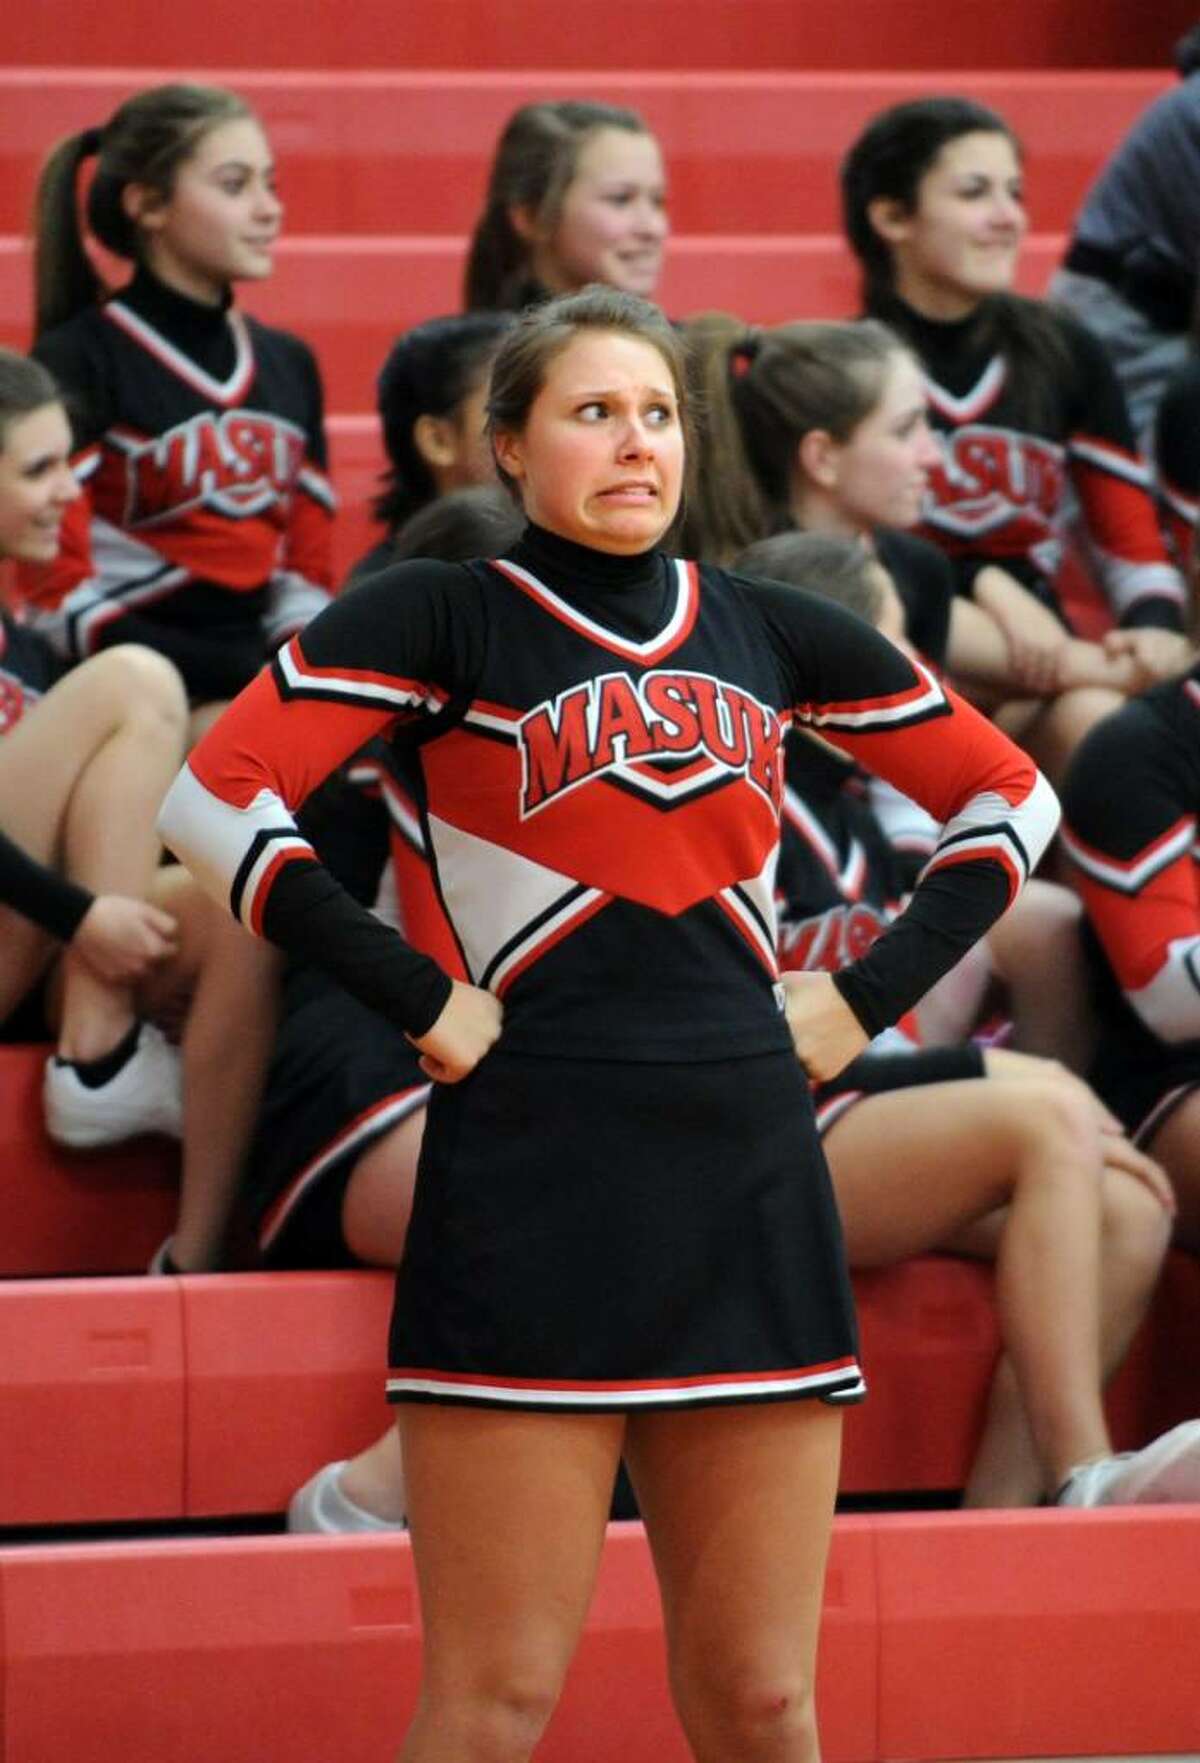 A Masuk cheerleader reacts during game action against Bunnell Wednesday Feb. 17, 2010 at Masuk.